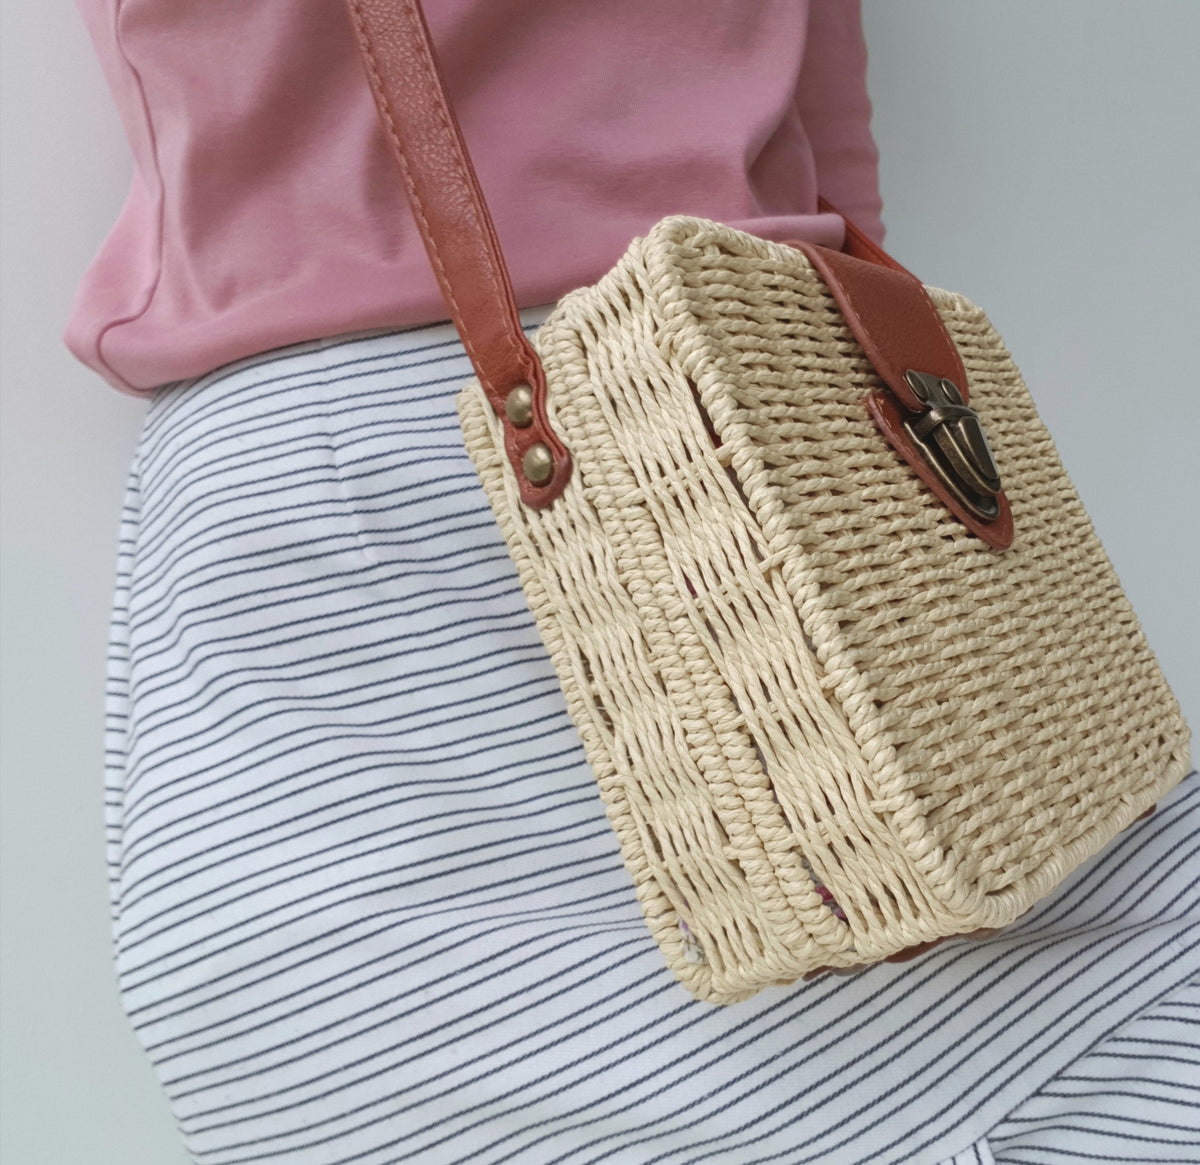 Lilly Woven Bag